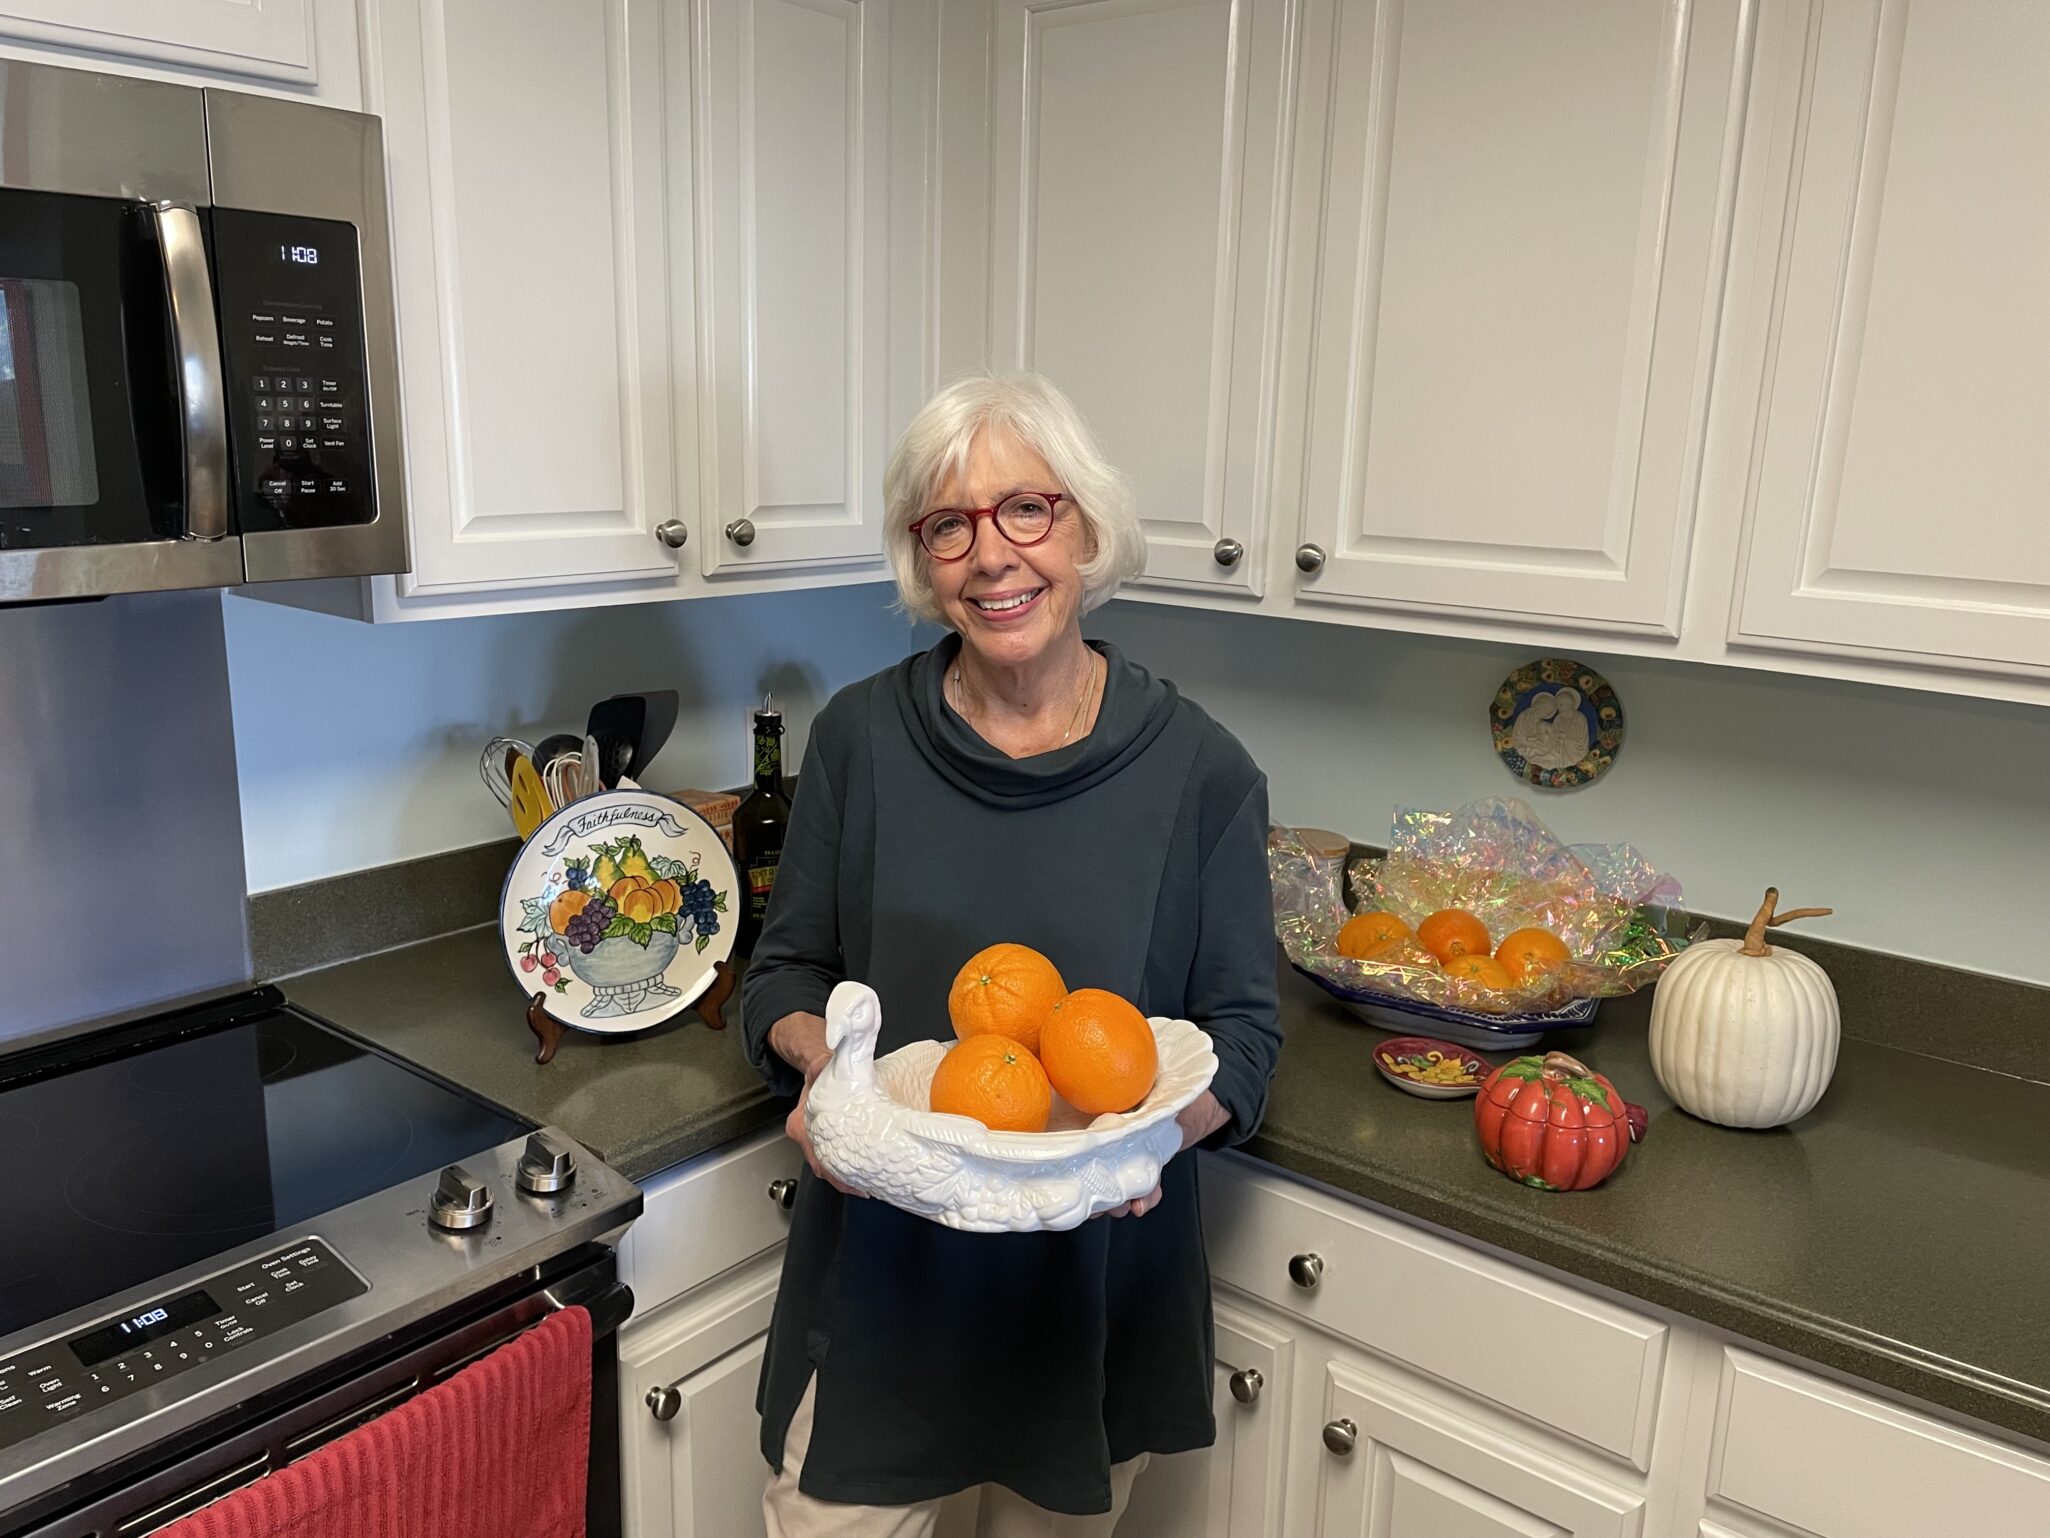 A woman holding oranges in a kitchen.